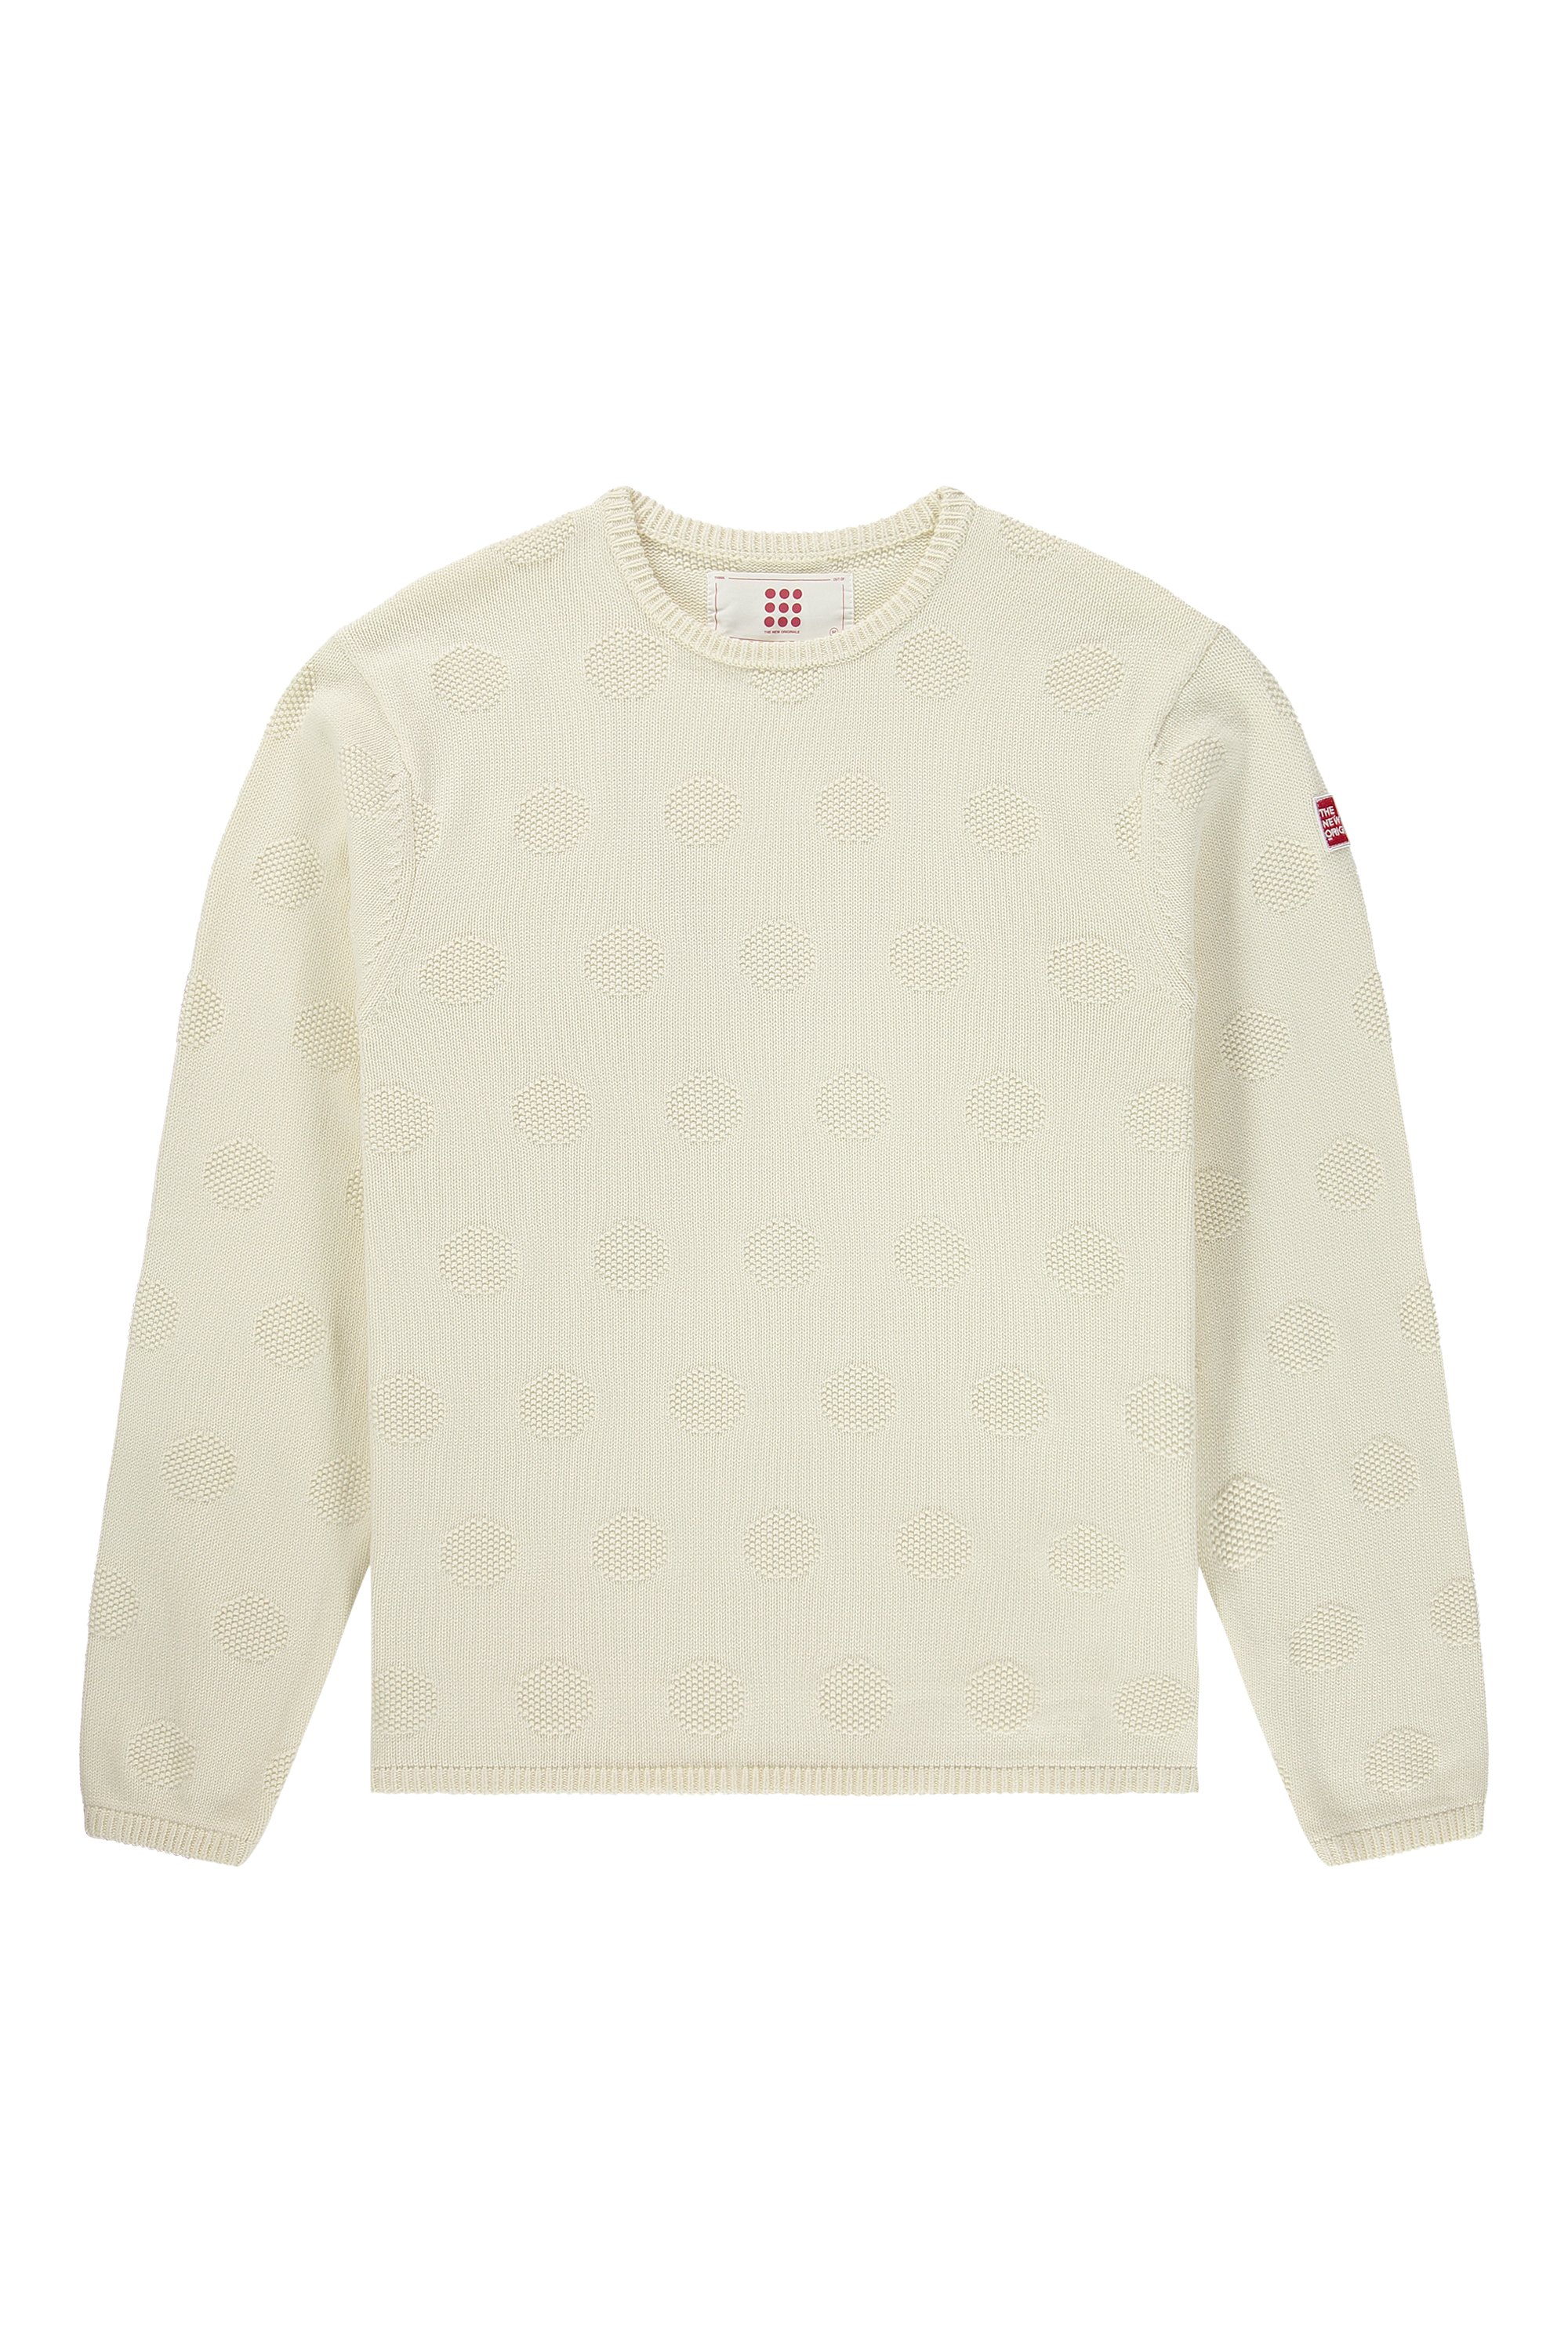 products-dotsknitcrewneck_whitealyssum_front-png